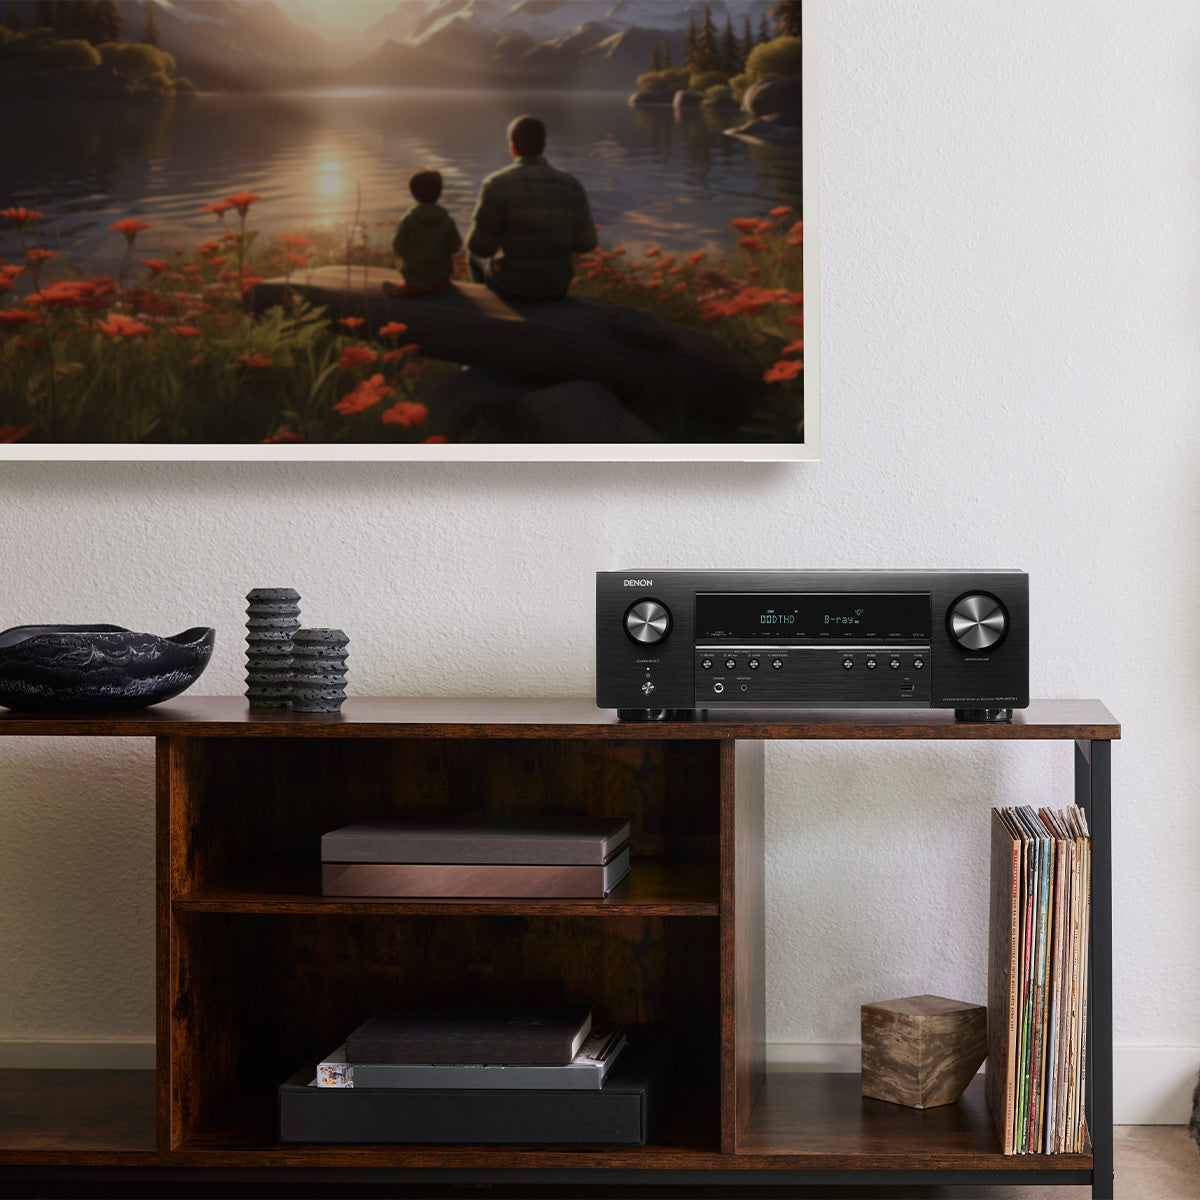 HEOS Audio, AVR-S670H Denon | Wide Receiver and Theater World 5.2 HDR10+, TrueHD Dolby Home with Built-In Stereo Channel 8K